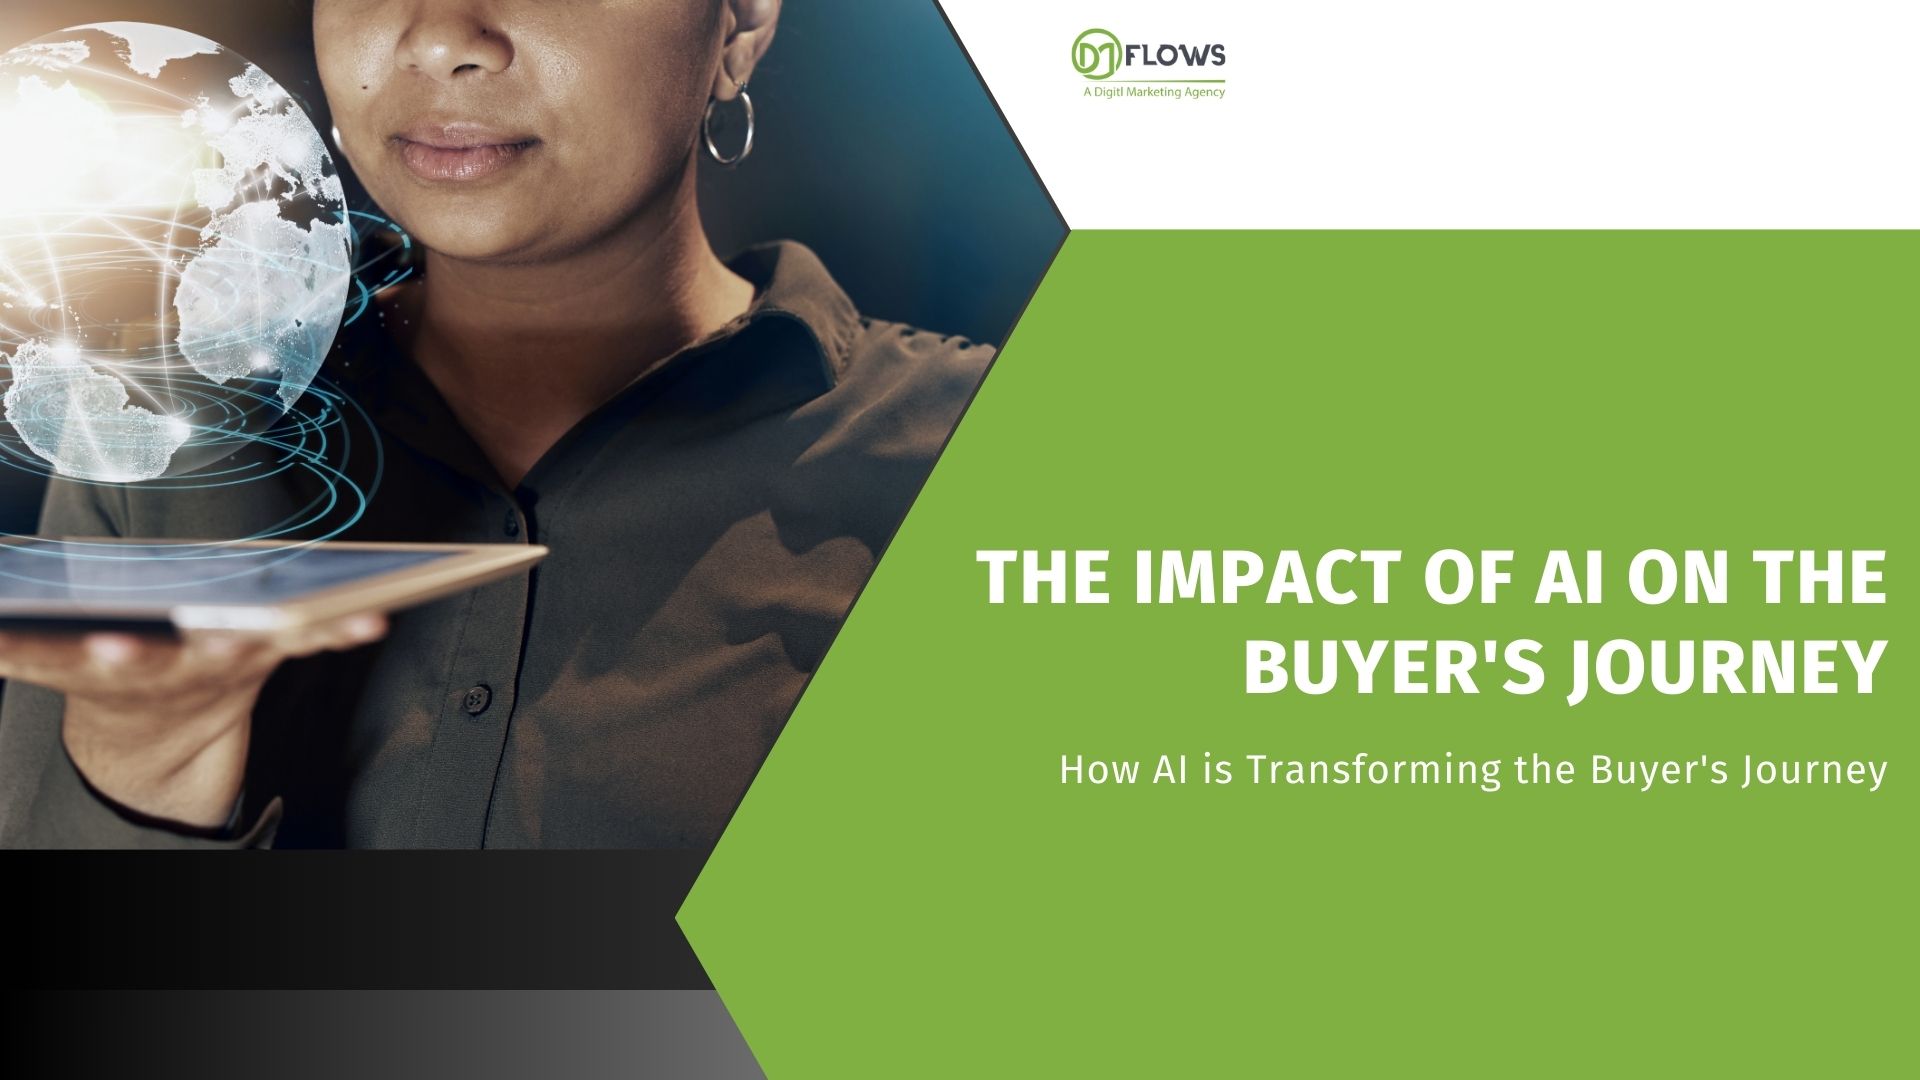 The impact of AI on the buyer's journey